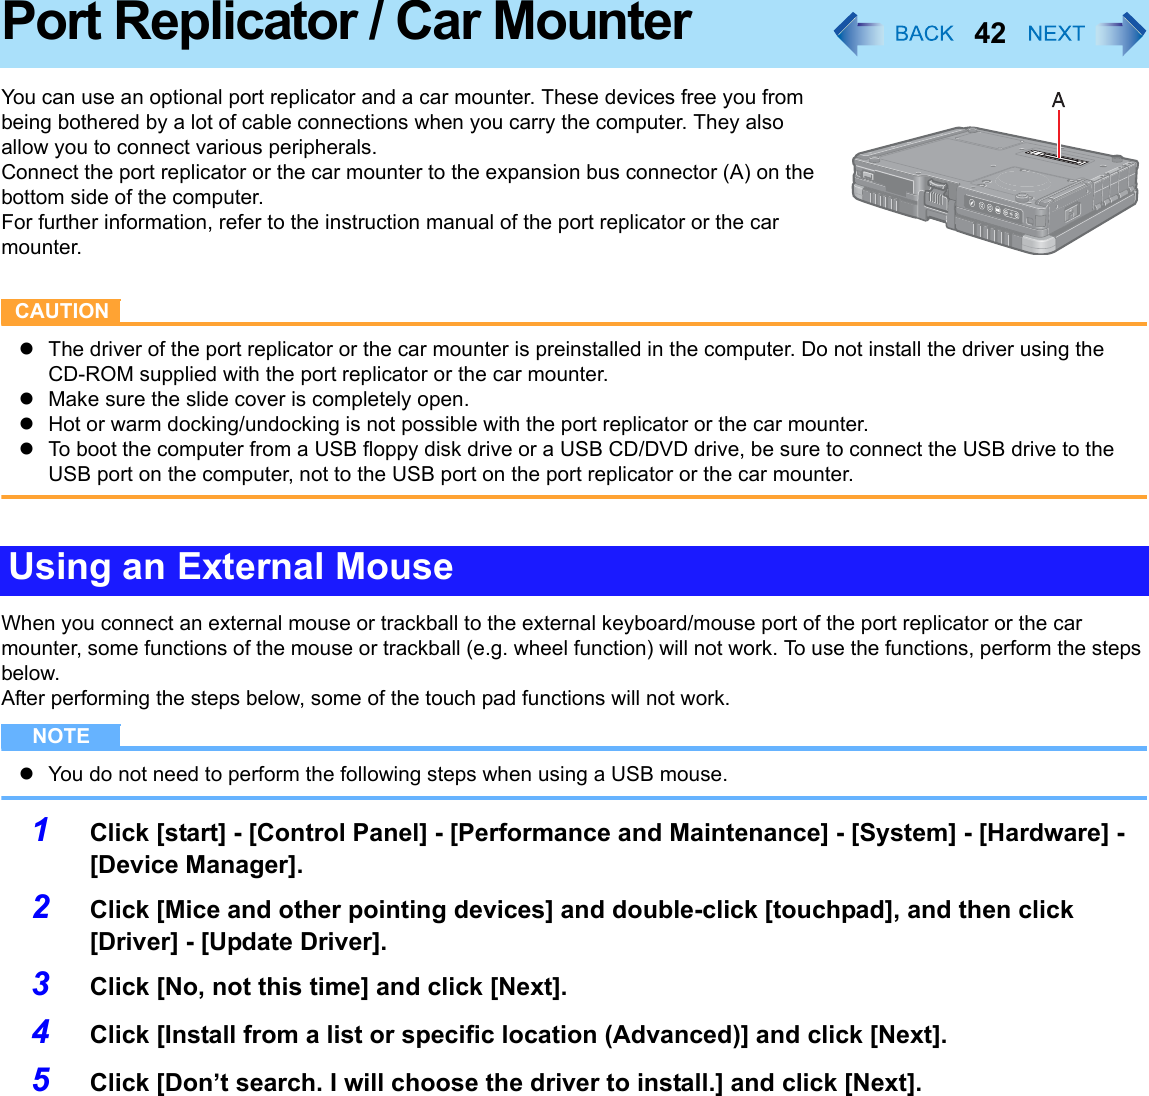 42Port Replicator / Car MounterYou can use an optional port replicator and a car mounter. These devices free you from being bothered by a lot of cable connections when you carry the computer. They also allow you to connect various peripherals.Connect the port replicator or the car mounter to the expansion bus connector (A) on the bottom side of the computer.For further information, refer to the instruction manual of the port replicator or the car mounter.CAUTIONzThe driver of the port replicator or the car mounter is preinstalled in the computer. Do not install the driver using the CD-ROM supplied with the port replicator or the car mounter.zMake sure the slide cover is completely open.zHot or warm docking/undocking is not possible with the port replicator or the car mounter.zTo boot the computer from a USB floppy disk drive or a USB CD/DVD drive, be sure to connect the USB drive to the USB port on the computer, not to the USB port on the port replicator or the car mounter.When you connect an external mouse or trackball to the external keyboard/mouse port of the port replicator or the car mounter, some functions of the mouse or trackball (e.g. wheel function) will not work. To use the functions, perform the steps below.After performing the steps below, some of the touch pad functions will not work.NOTEzYou do not need to perform the following steps when using a USB mouse.1Click [start] - [Control Panel] - [Performance and Maintenance] - [System] - [Hardware] - [Device Manager].2Click [Mice and other pointing devices] and double-click [touchpad], and then click [Driver] - [Update Driver].3Click [No, not this time] and click [Next].4Click [Install from a list or specific location (Advanced)] and click [Next].5Click [Don’t search. I will choose the driver to install.] and click [Next].Using an External Mouse